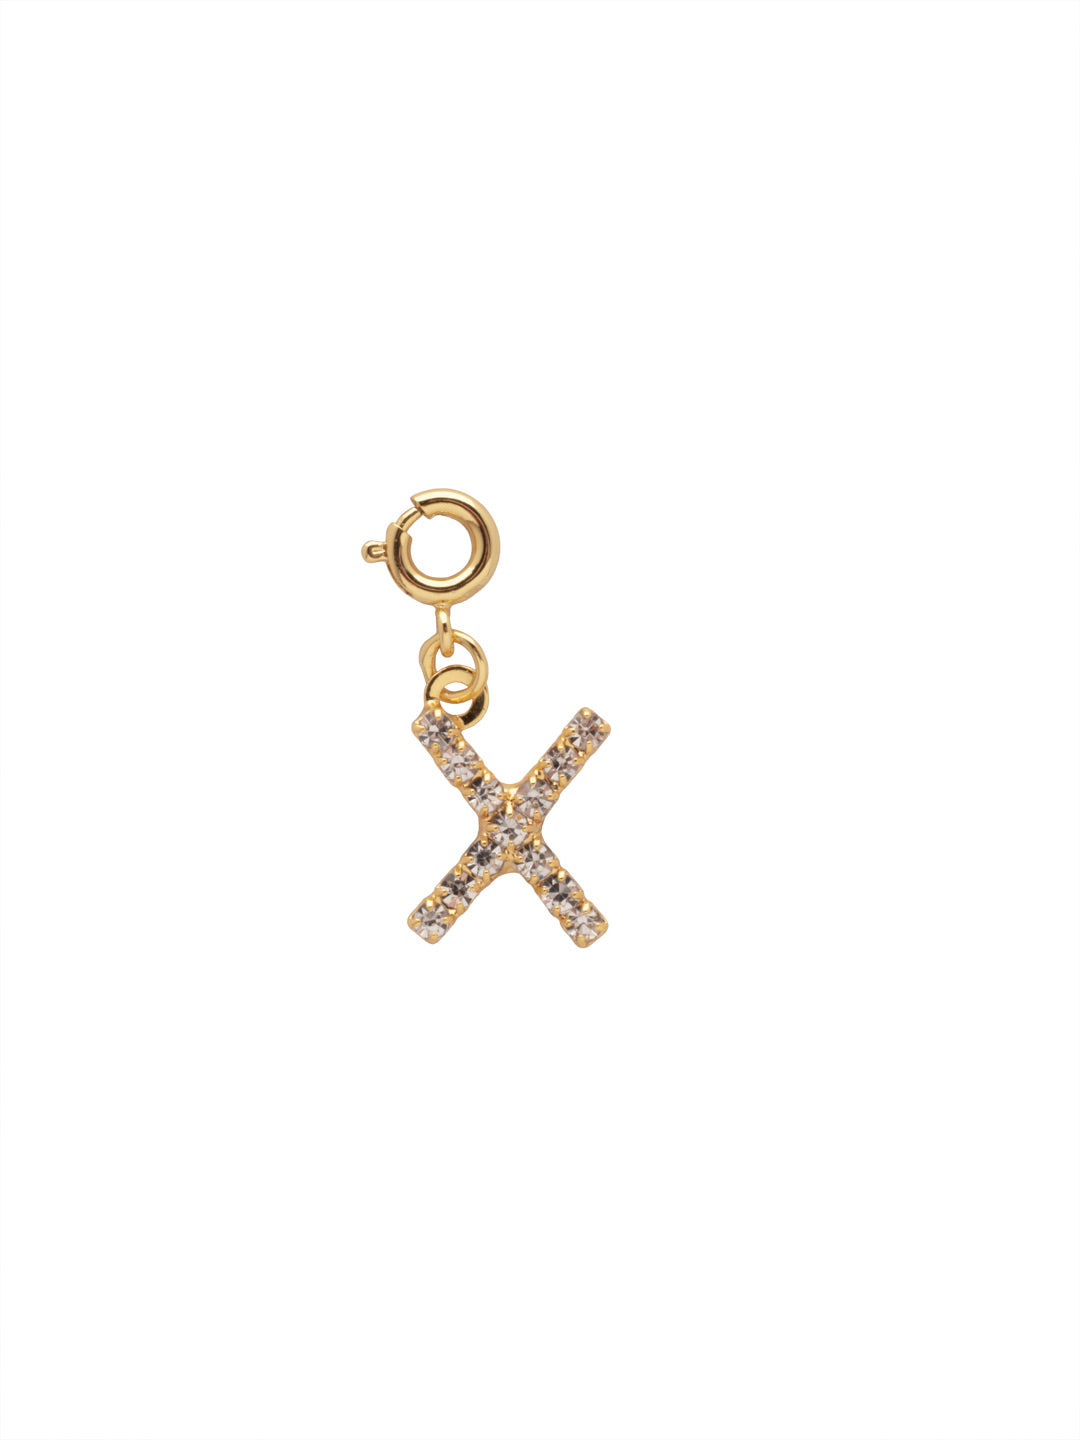 "X" Initial Charm - CFB24BGCRY - <p>The Initial Charm features a metal letter embellished with small round crystals and a small spring ring clasp. From Sorrelli's Crystal collection in our Bright Gold-tone finish.</p>